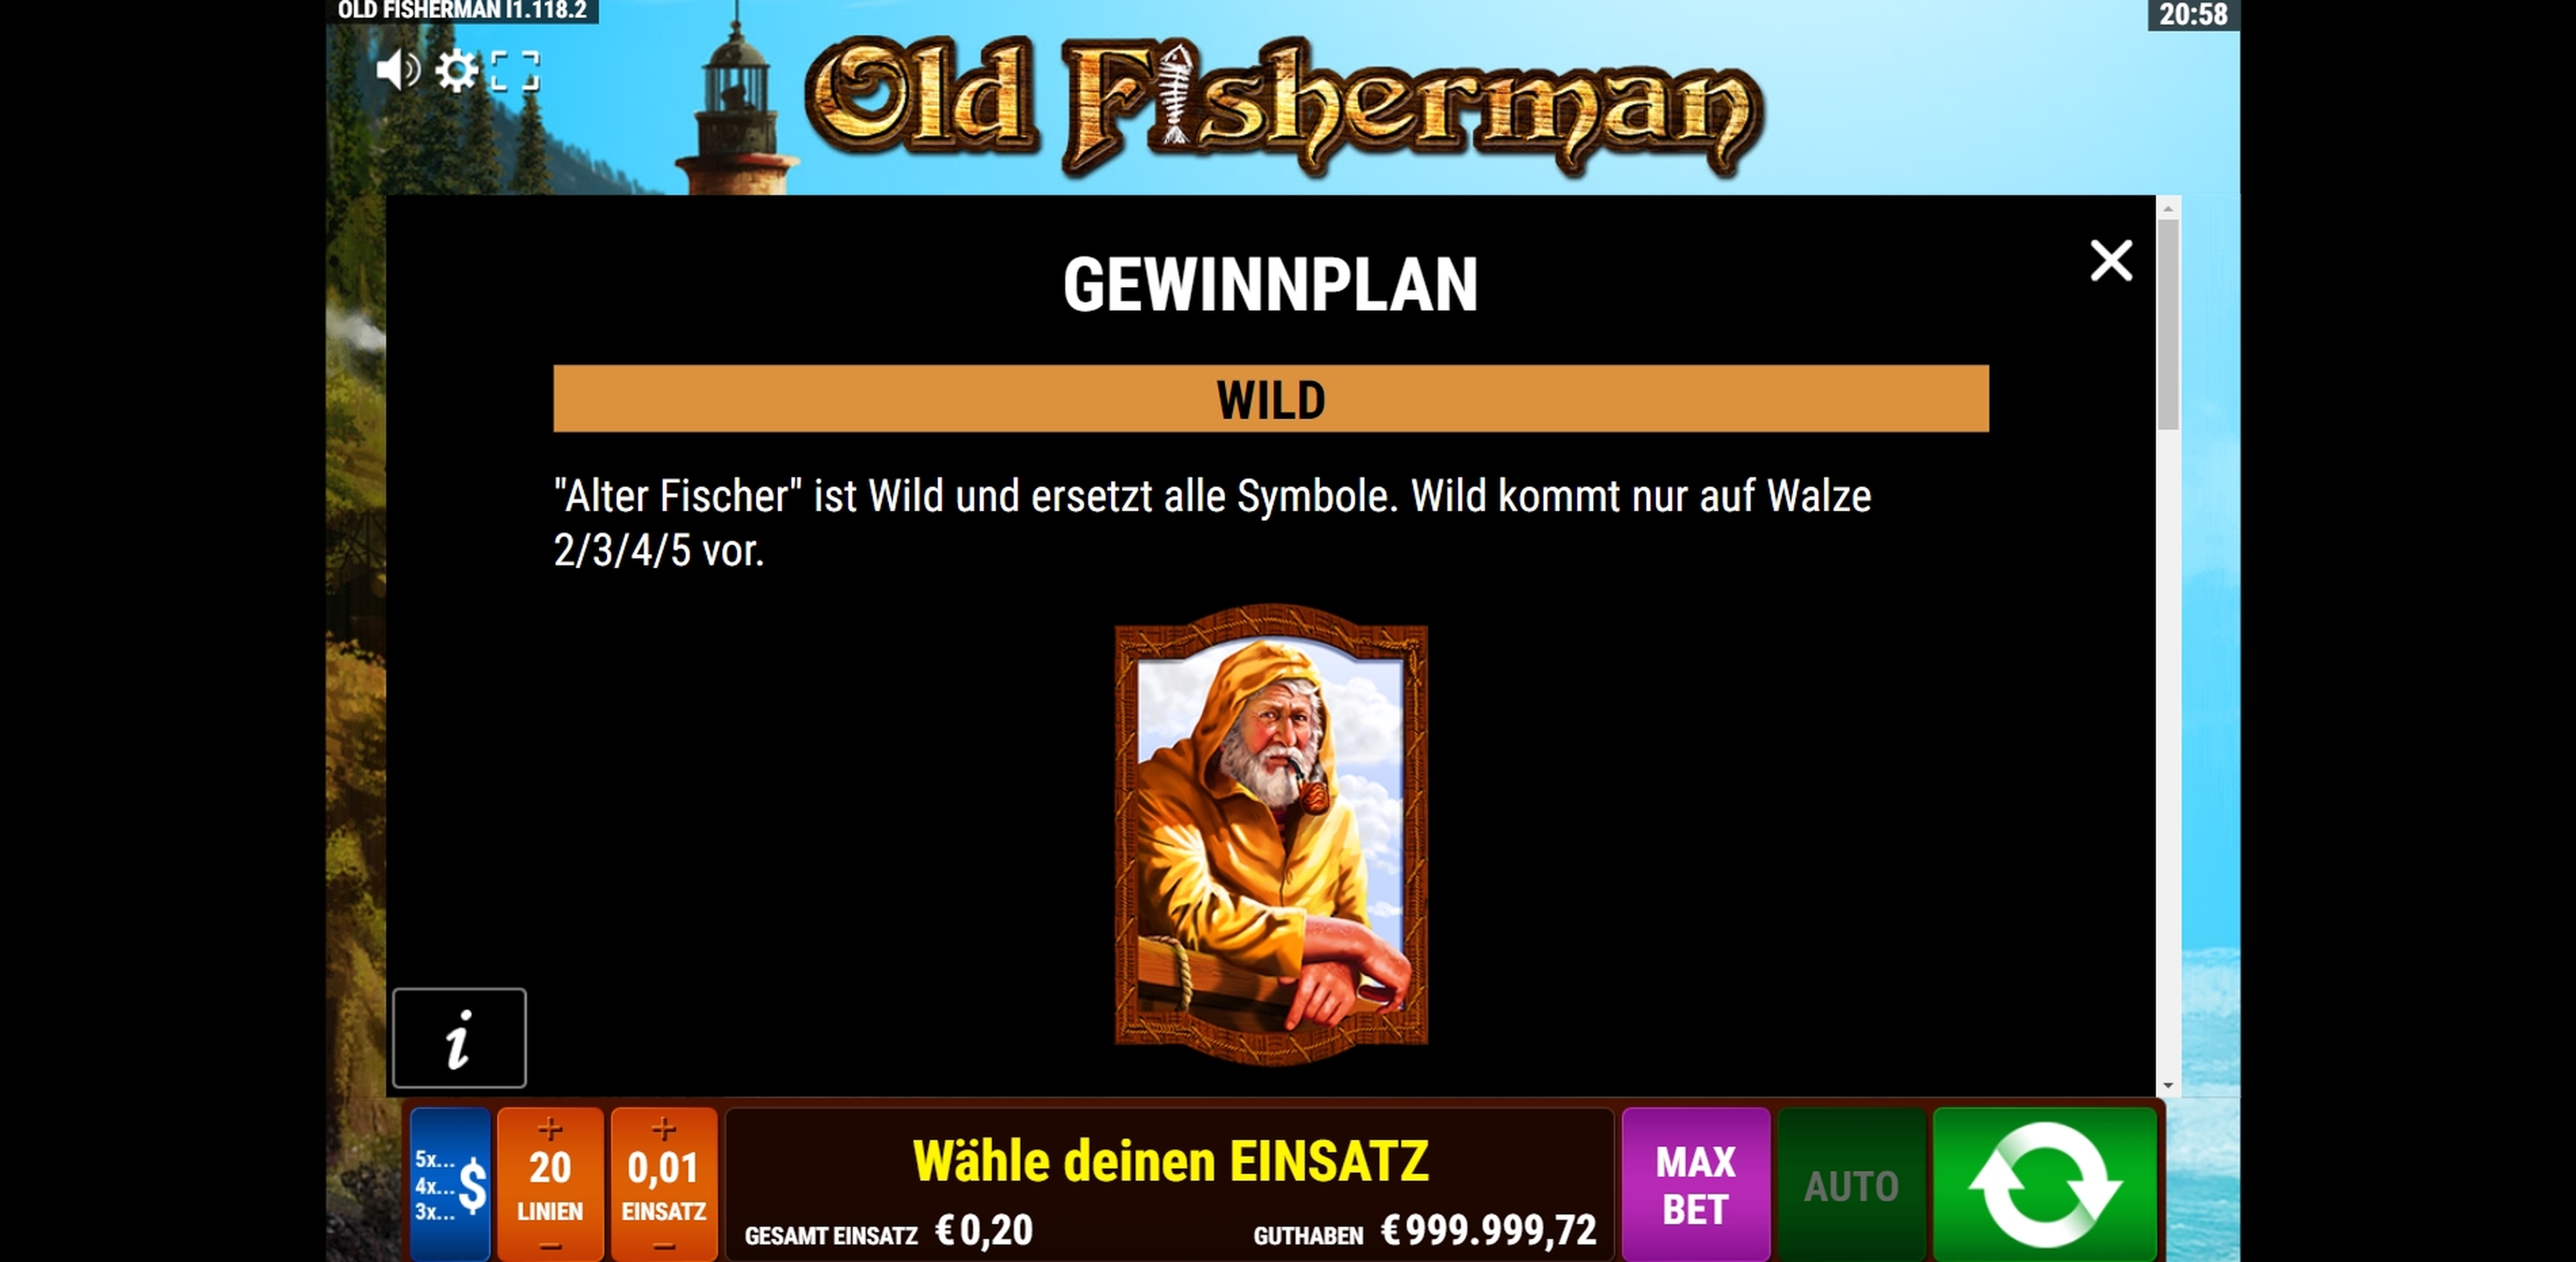 Info of Old Fisherman Slot Game by Bally Wulff